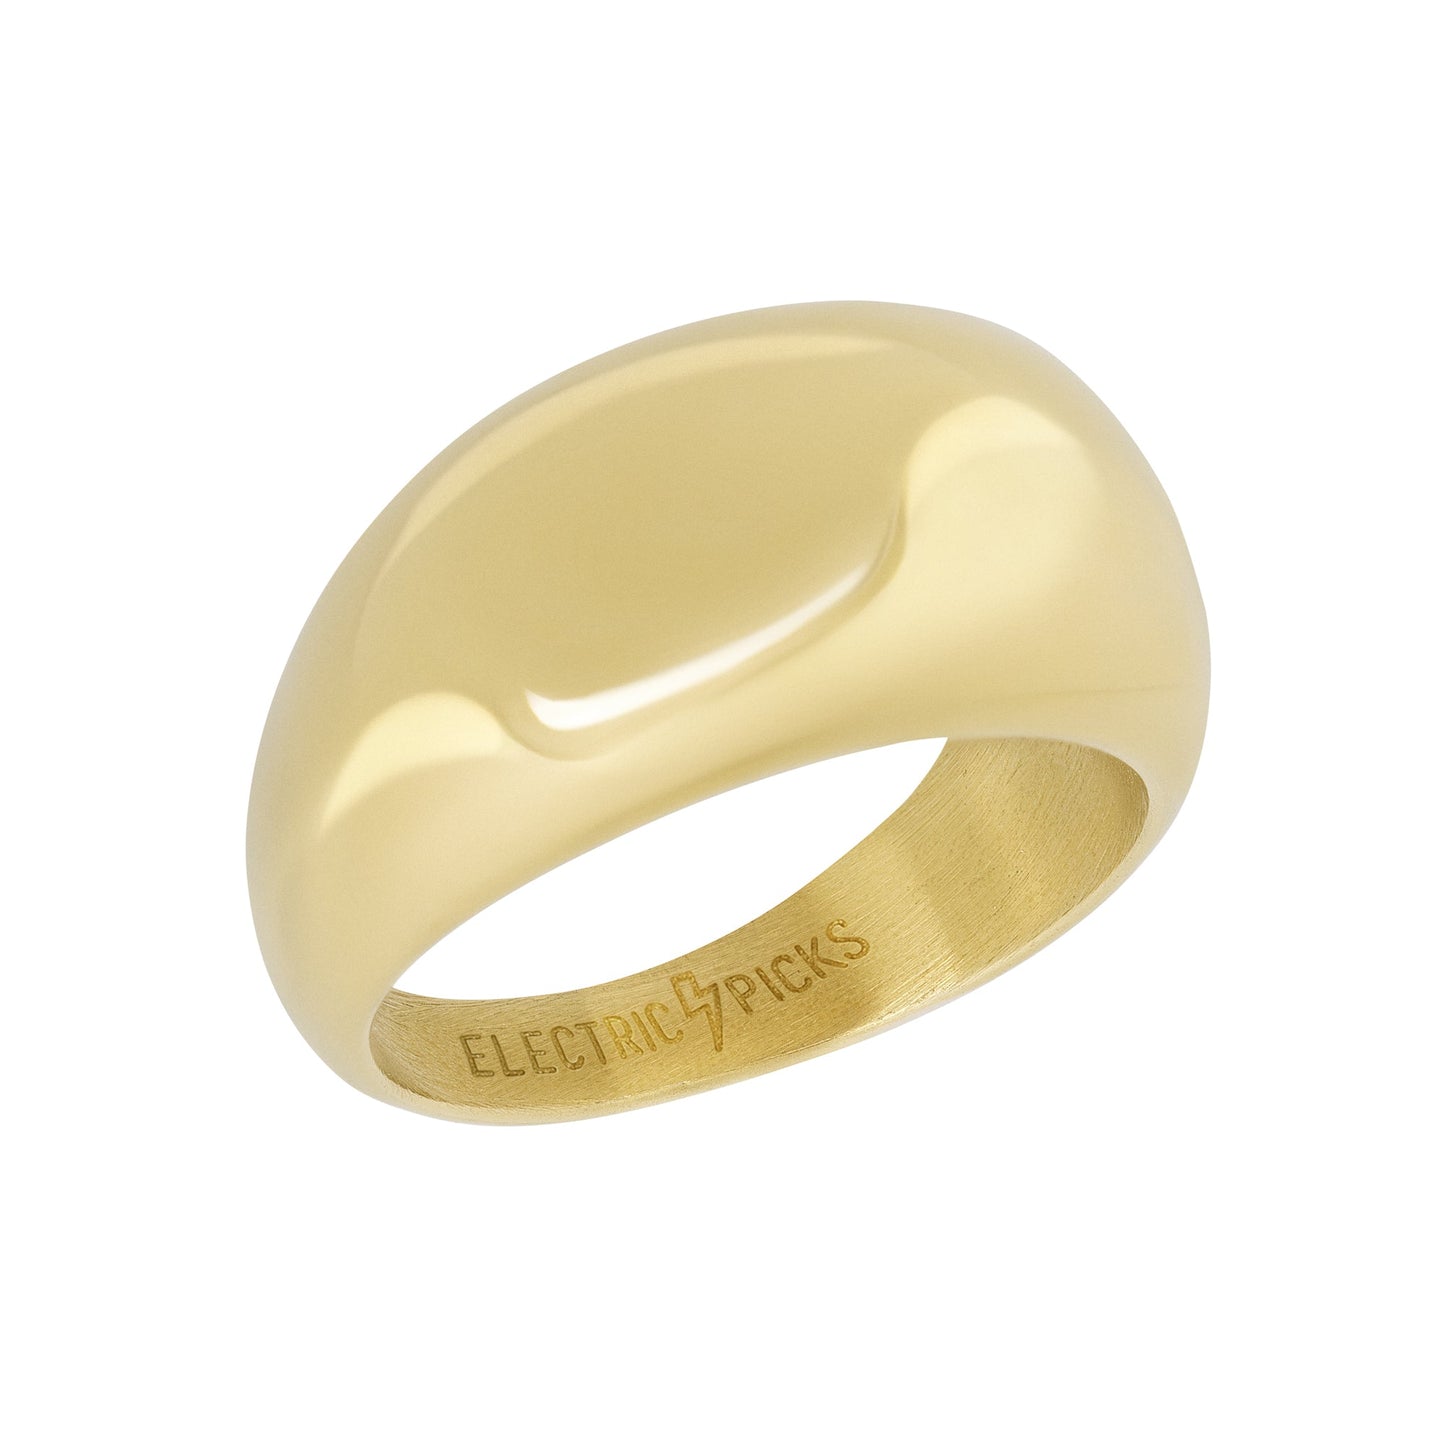 Electric Picks Allure Ring